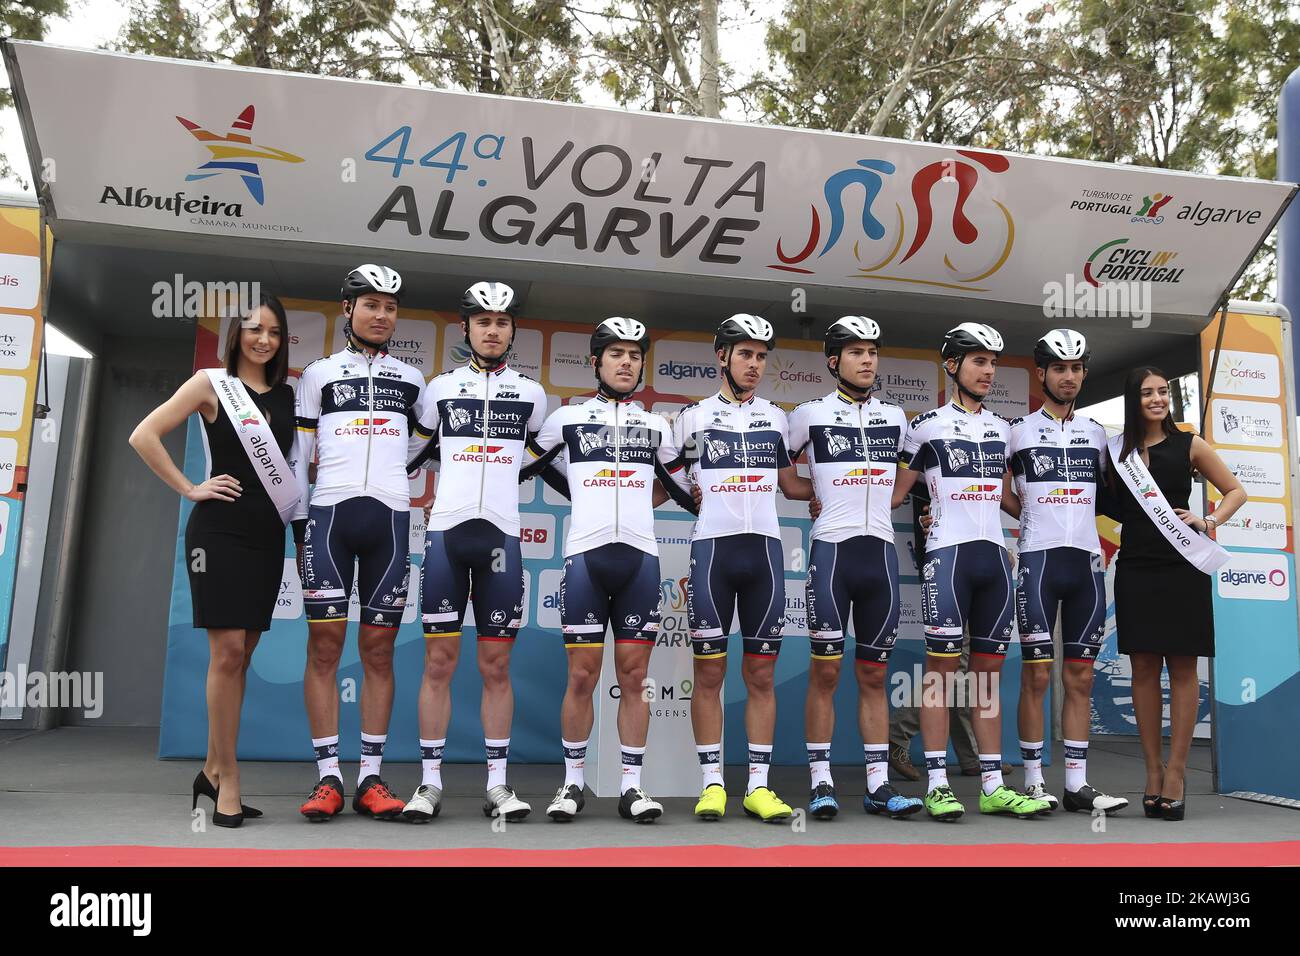 Liberty Seguros/Carglass before the 1st stage of the cycling Tour of Algarve between Albufeira and Lagos, on February 14, 2018. (LM Press/Global Imagens/NurPhoto) Stock Photo